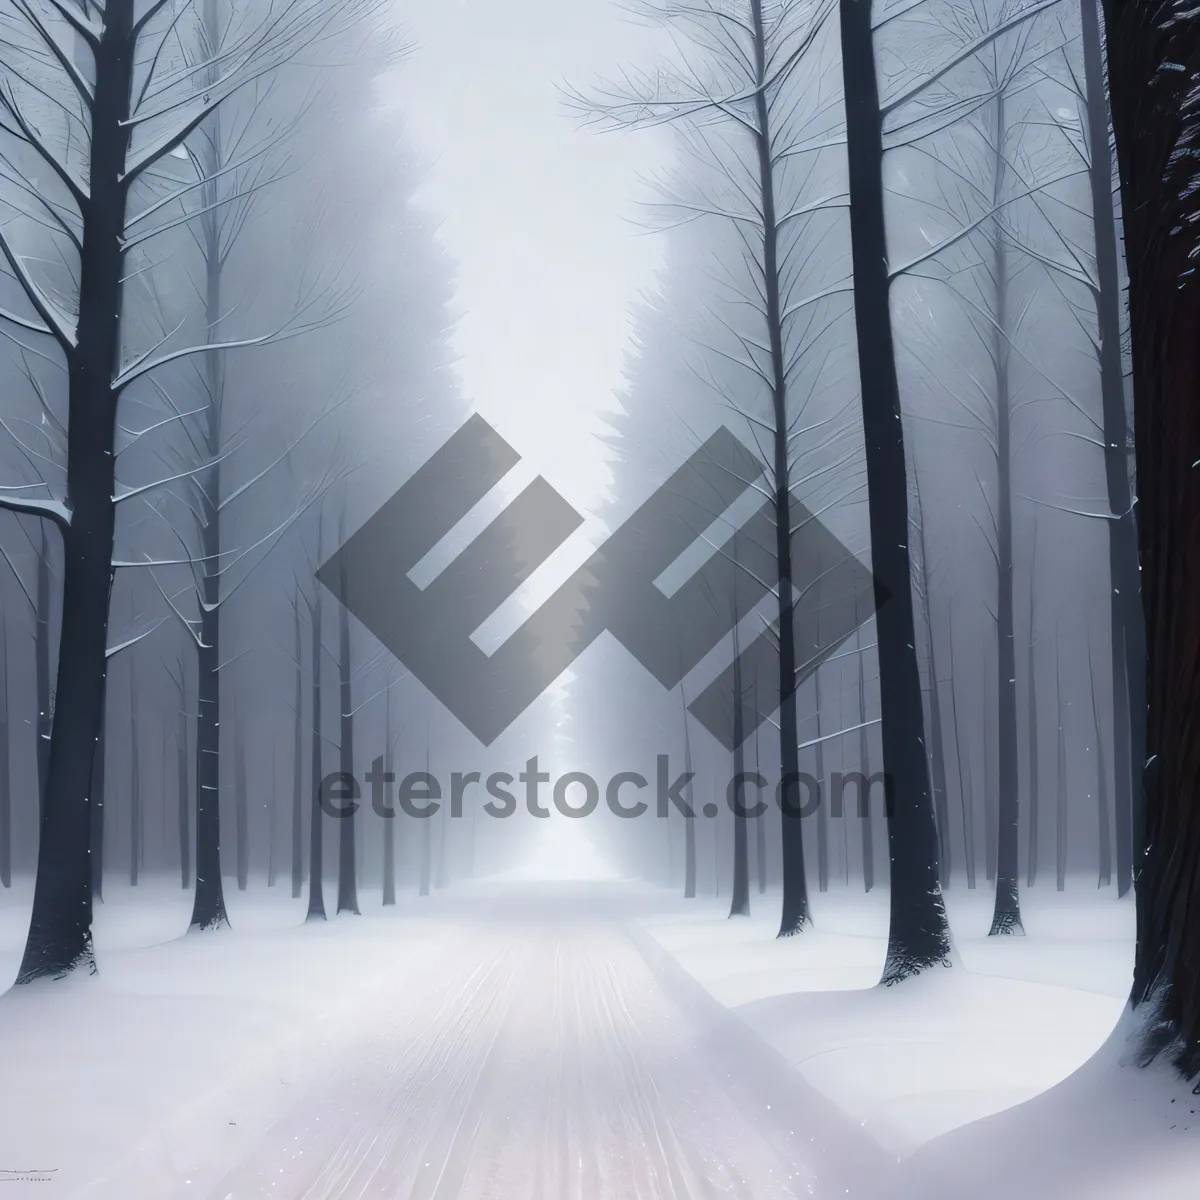 Picture of Winter Wonderland: Serene snowy forest scene with frozen trees